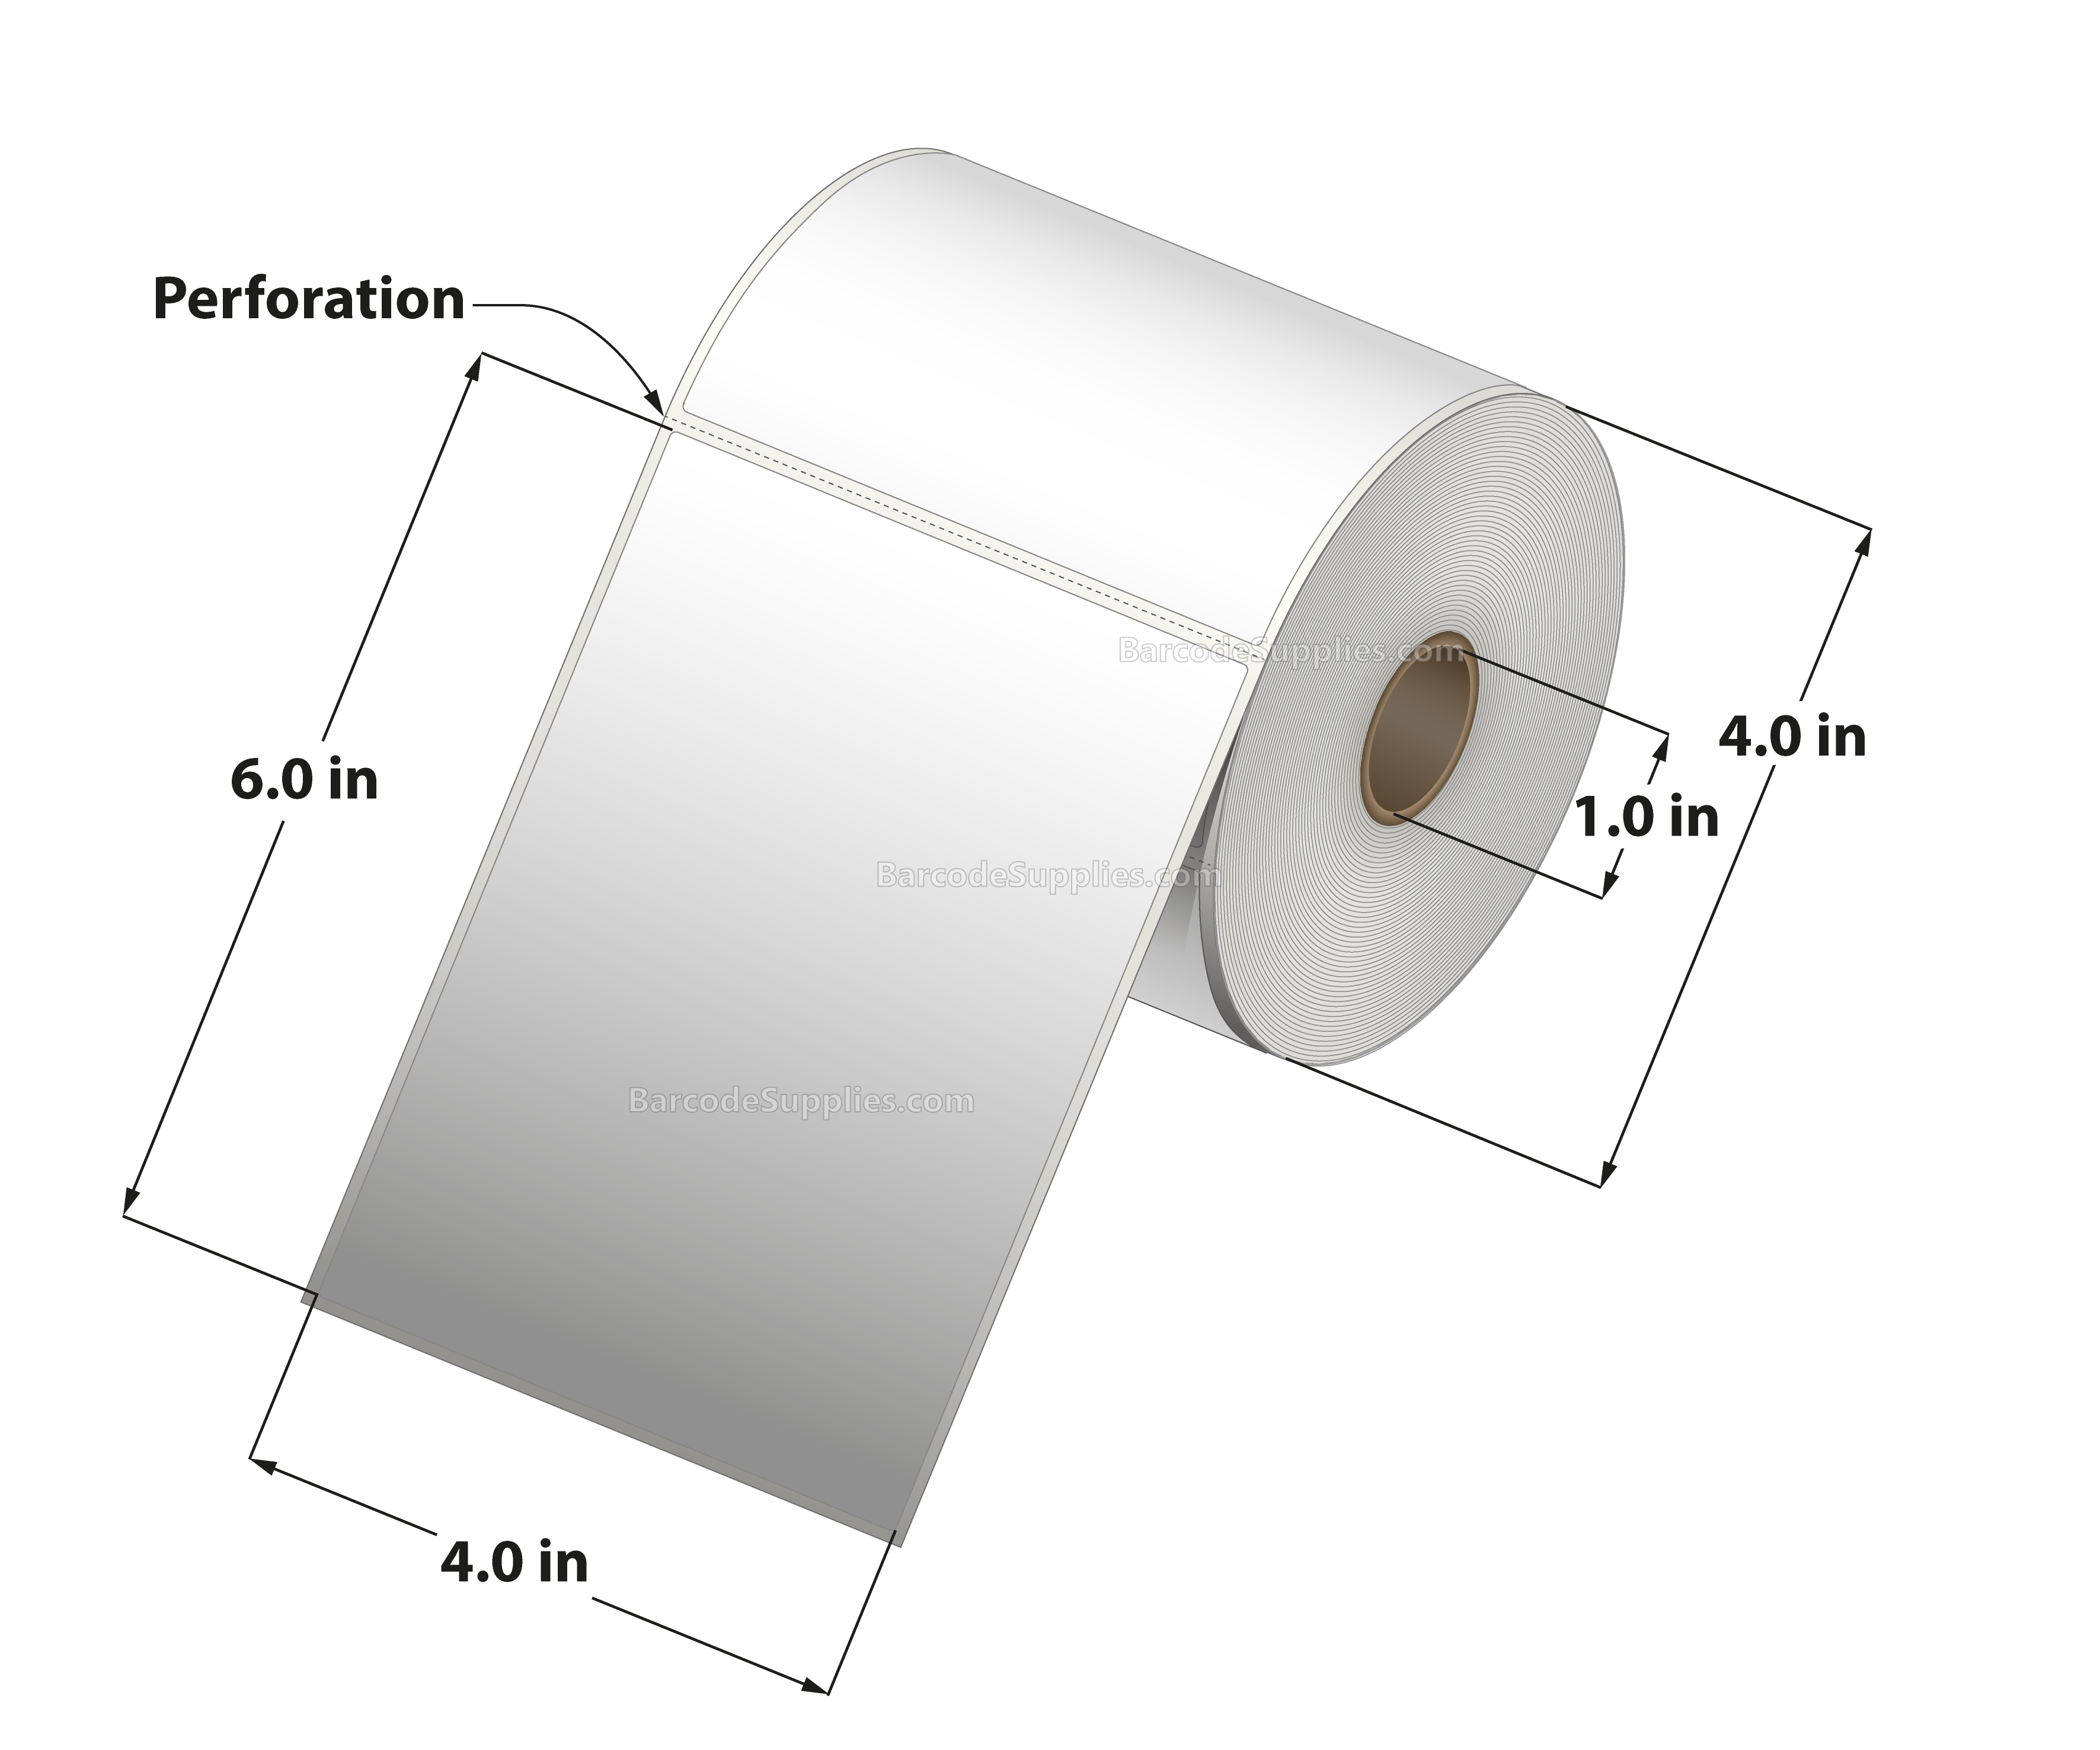 4 x 6 Direct Thermal White Labels With Acrylic Adhesive - Perforated - 250 Labels Per Roll - Carton Of 12 Rolls - 3000 Labels Total - MPN: RD-4-6-250-1 - BarcodeSource, Inc.